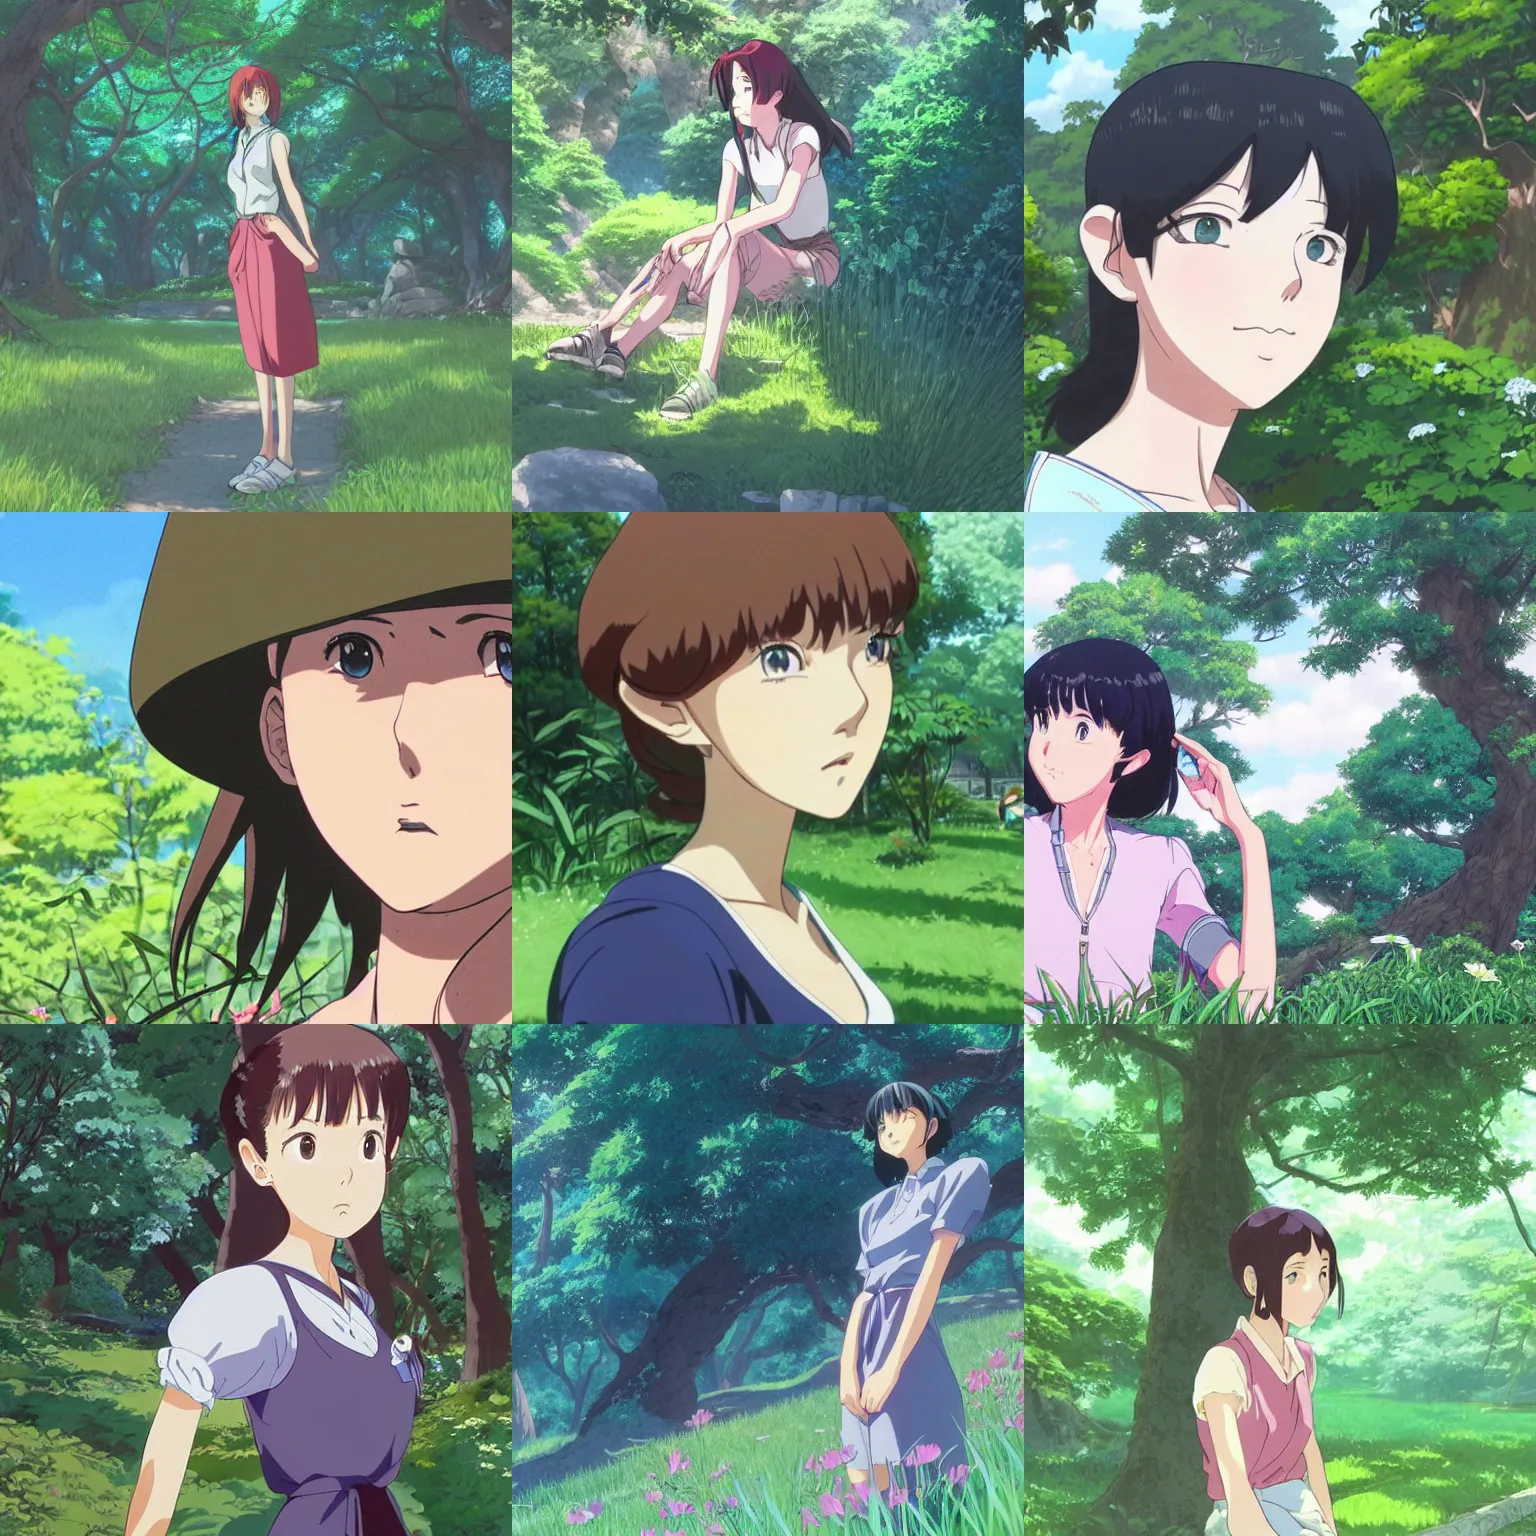 Prompt: Character portrait of a young woman in a lush park, 90s anime facial features, expressive eyes, highly detailed, cel shading, Studio Ghibli still, by Makoto Shinkai and Akihiko Yoshida